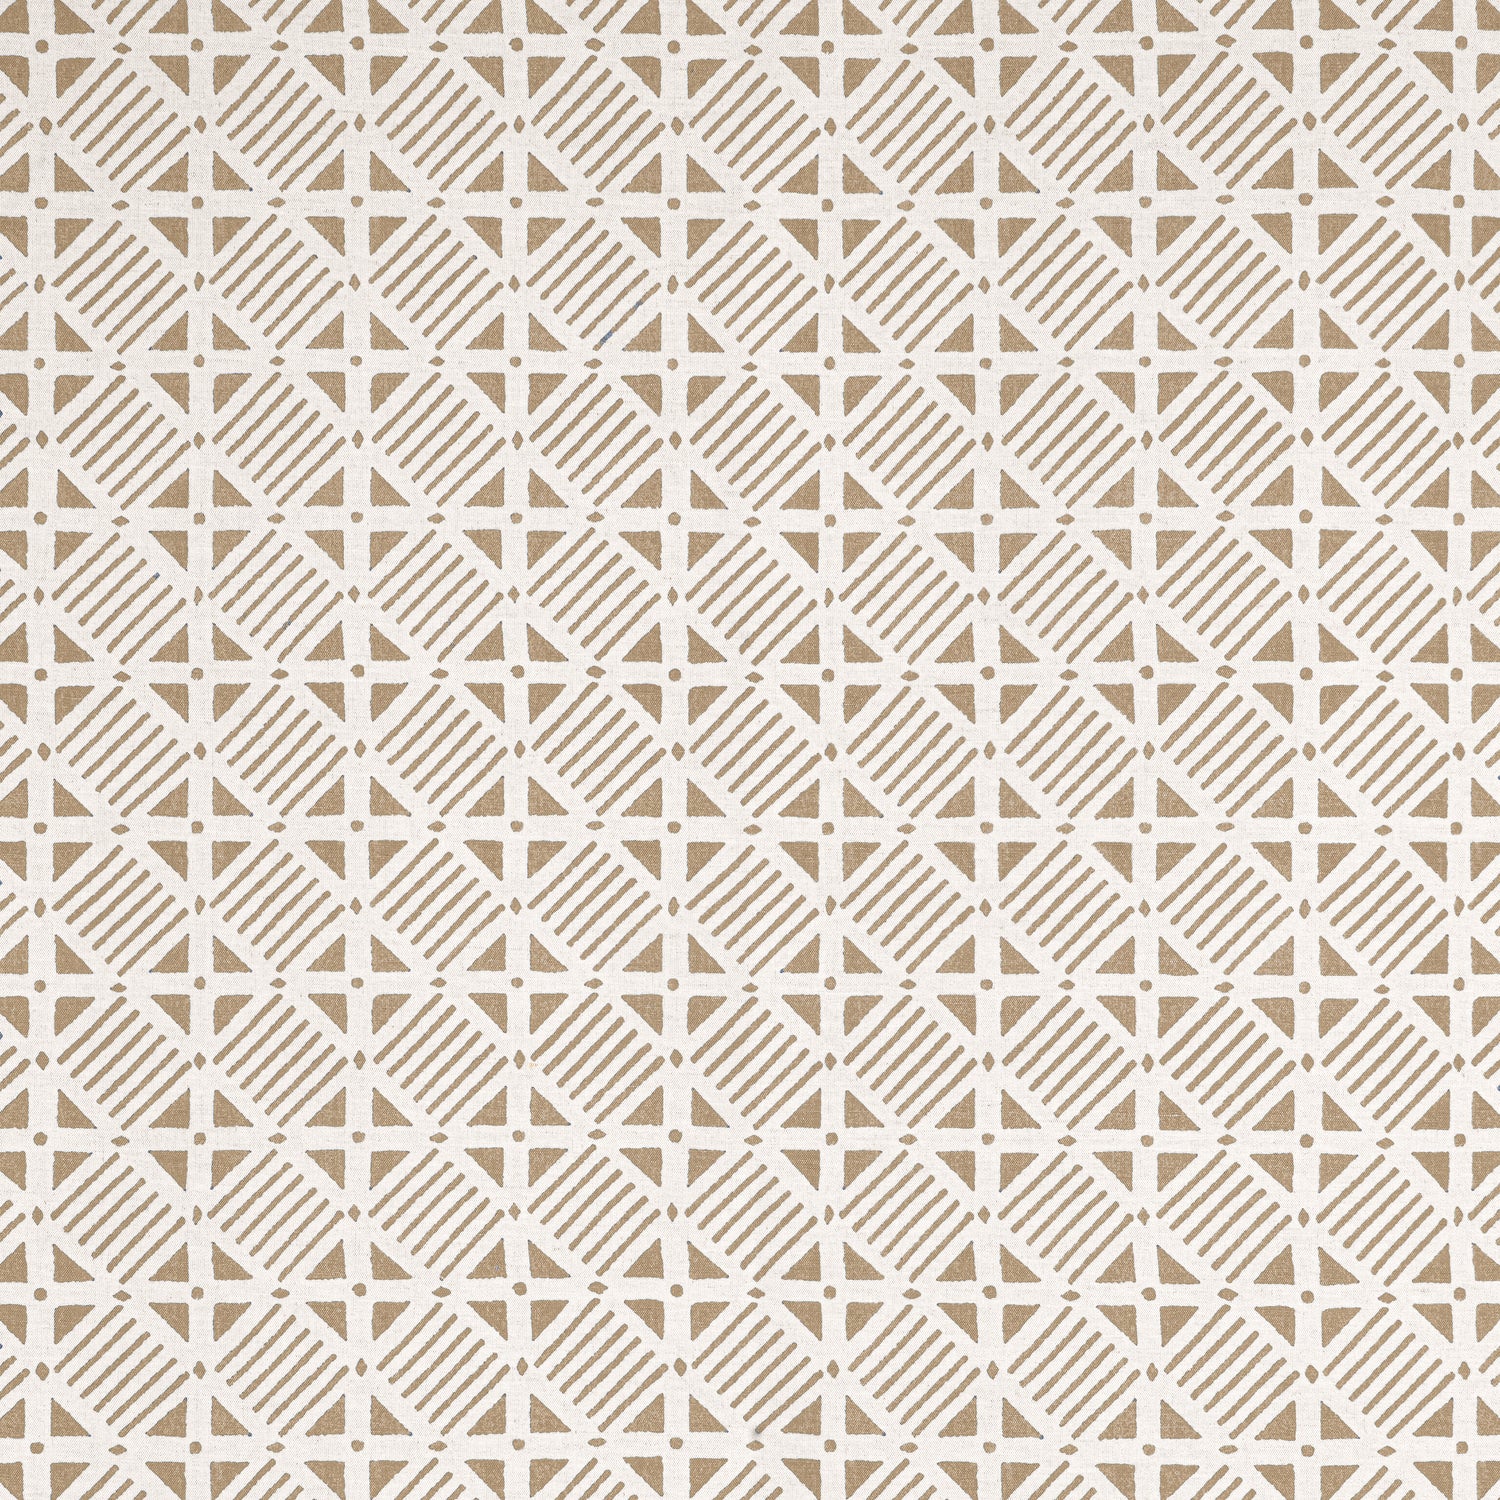 Plaza fabric in camel on natural color - pattern number F916223 - by Thibaut in the Kismet collection